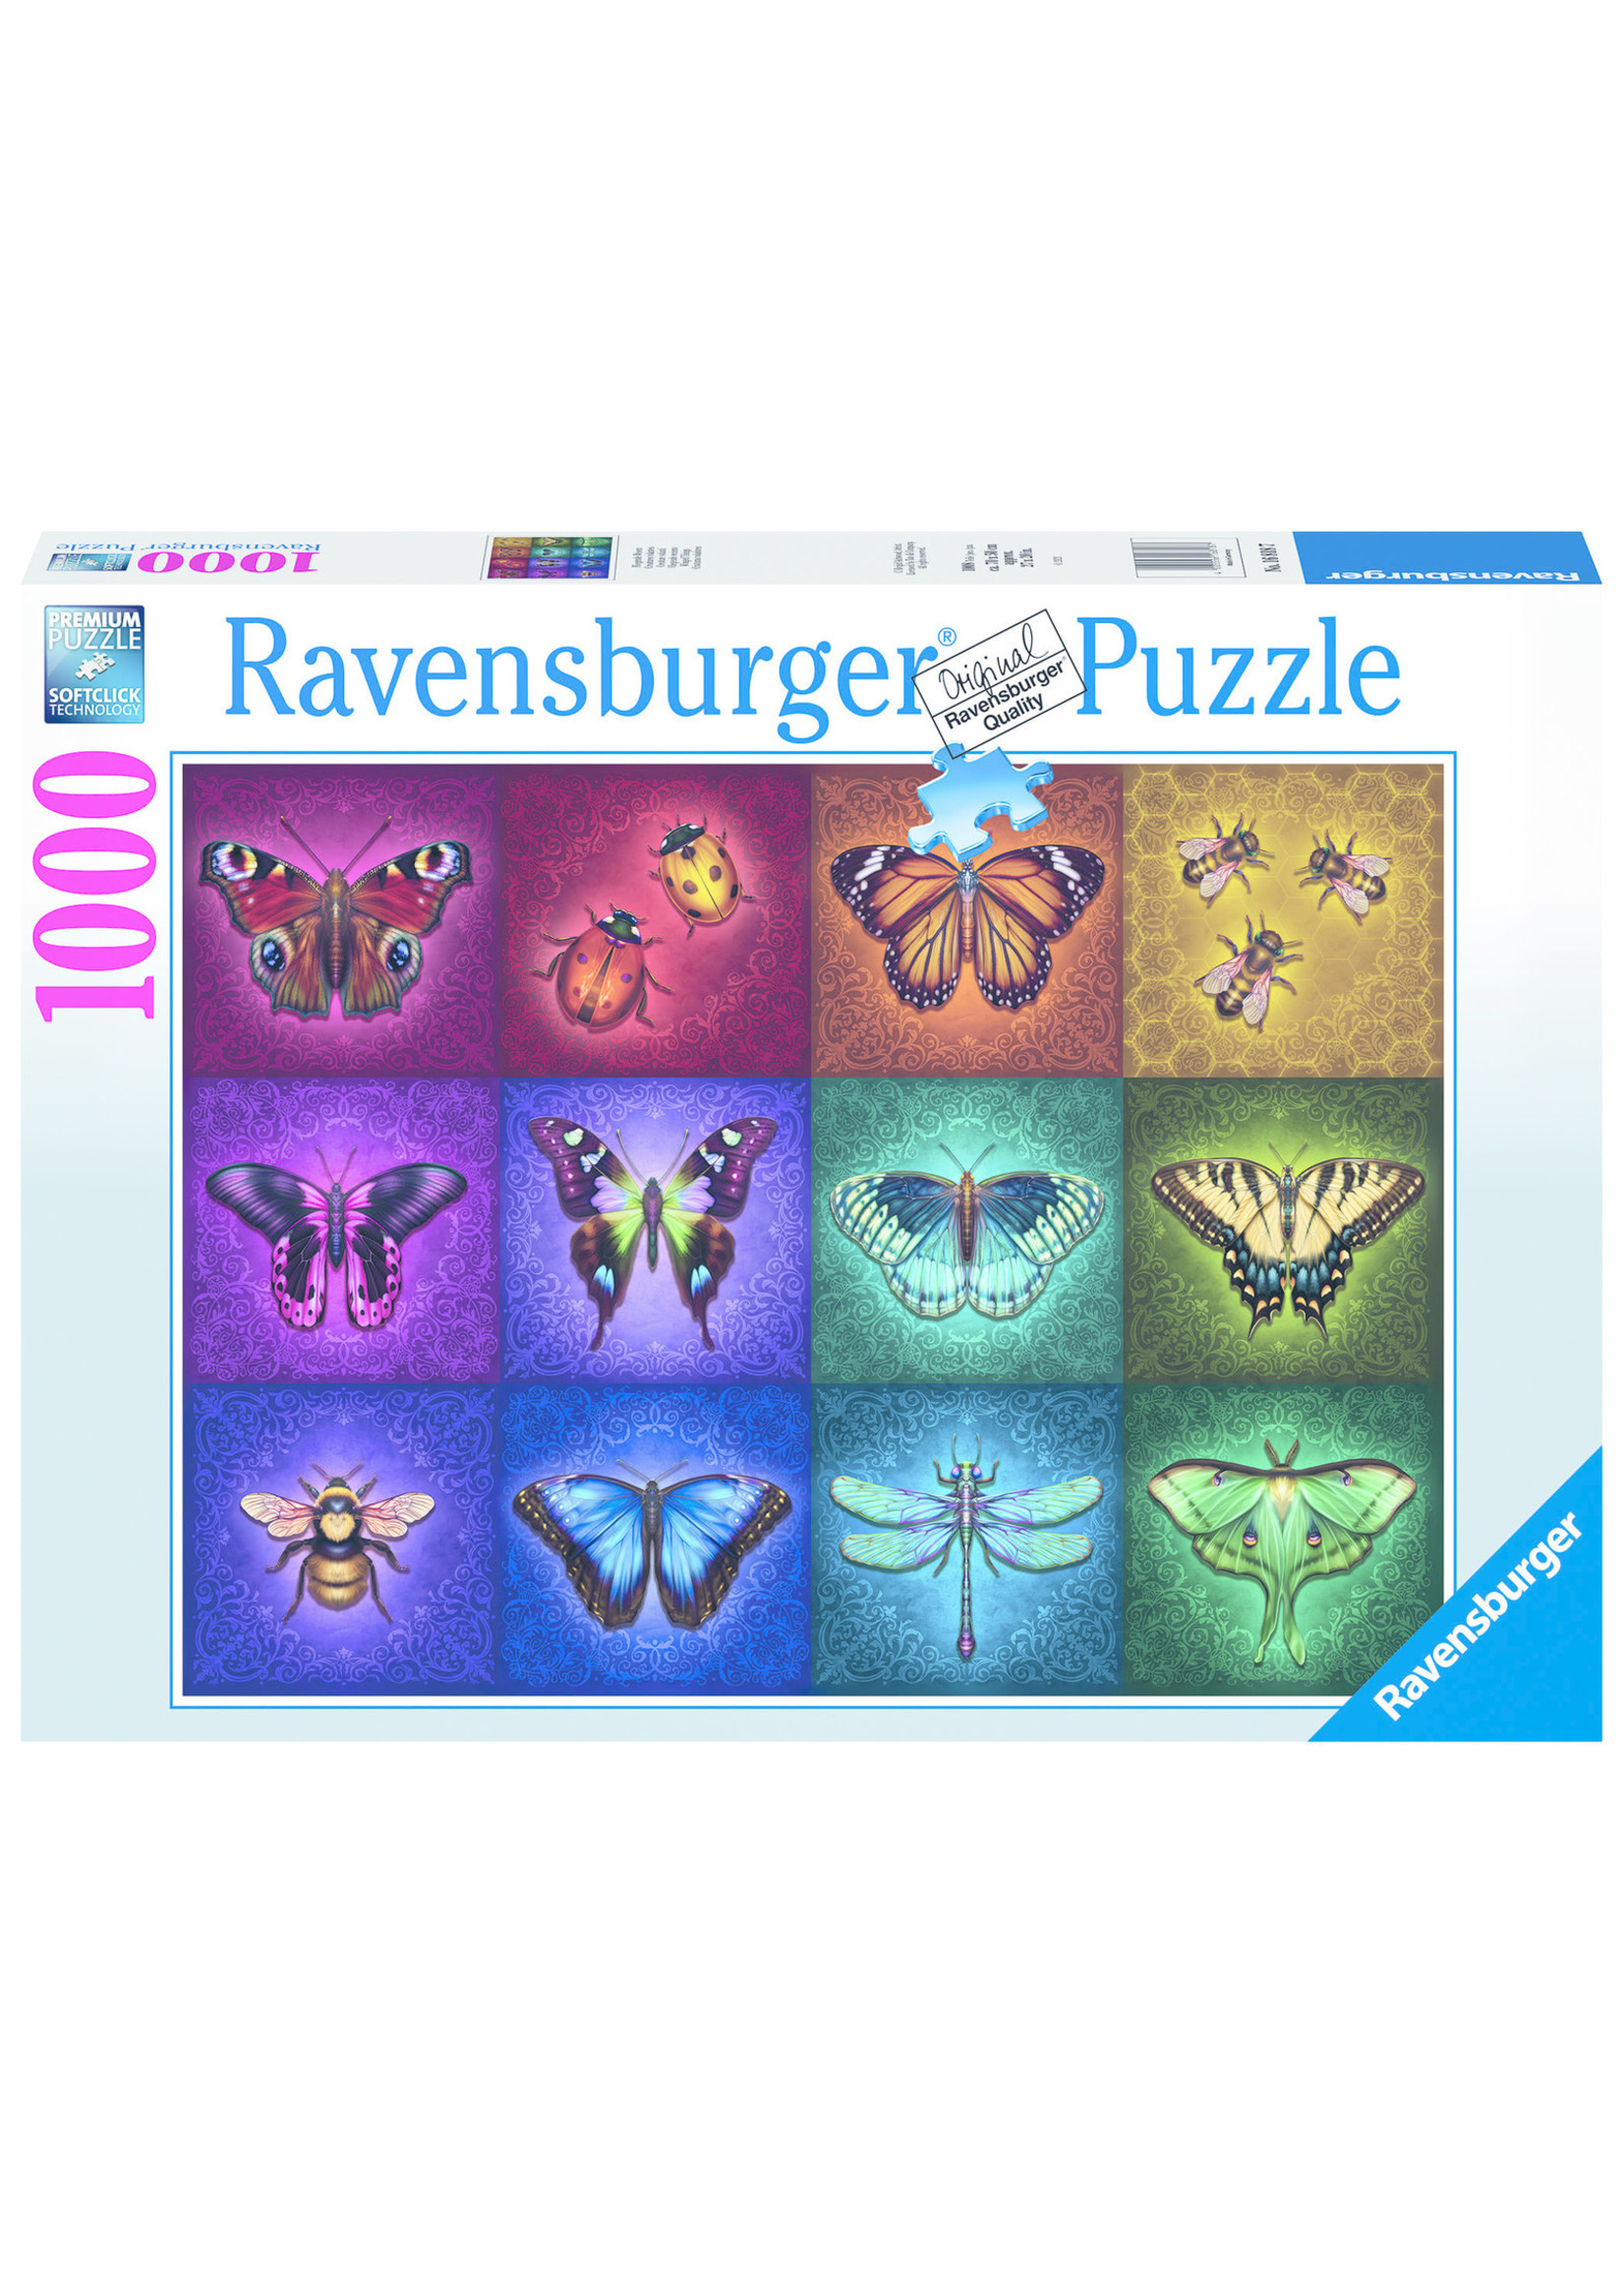 Ravensburger "Winged Things" 1000 Piece Puzzle